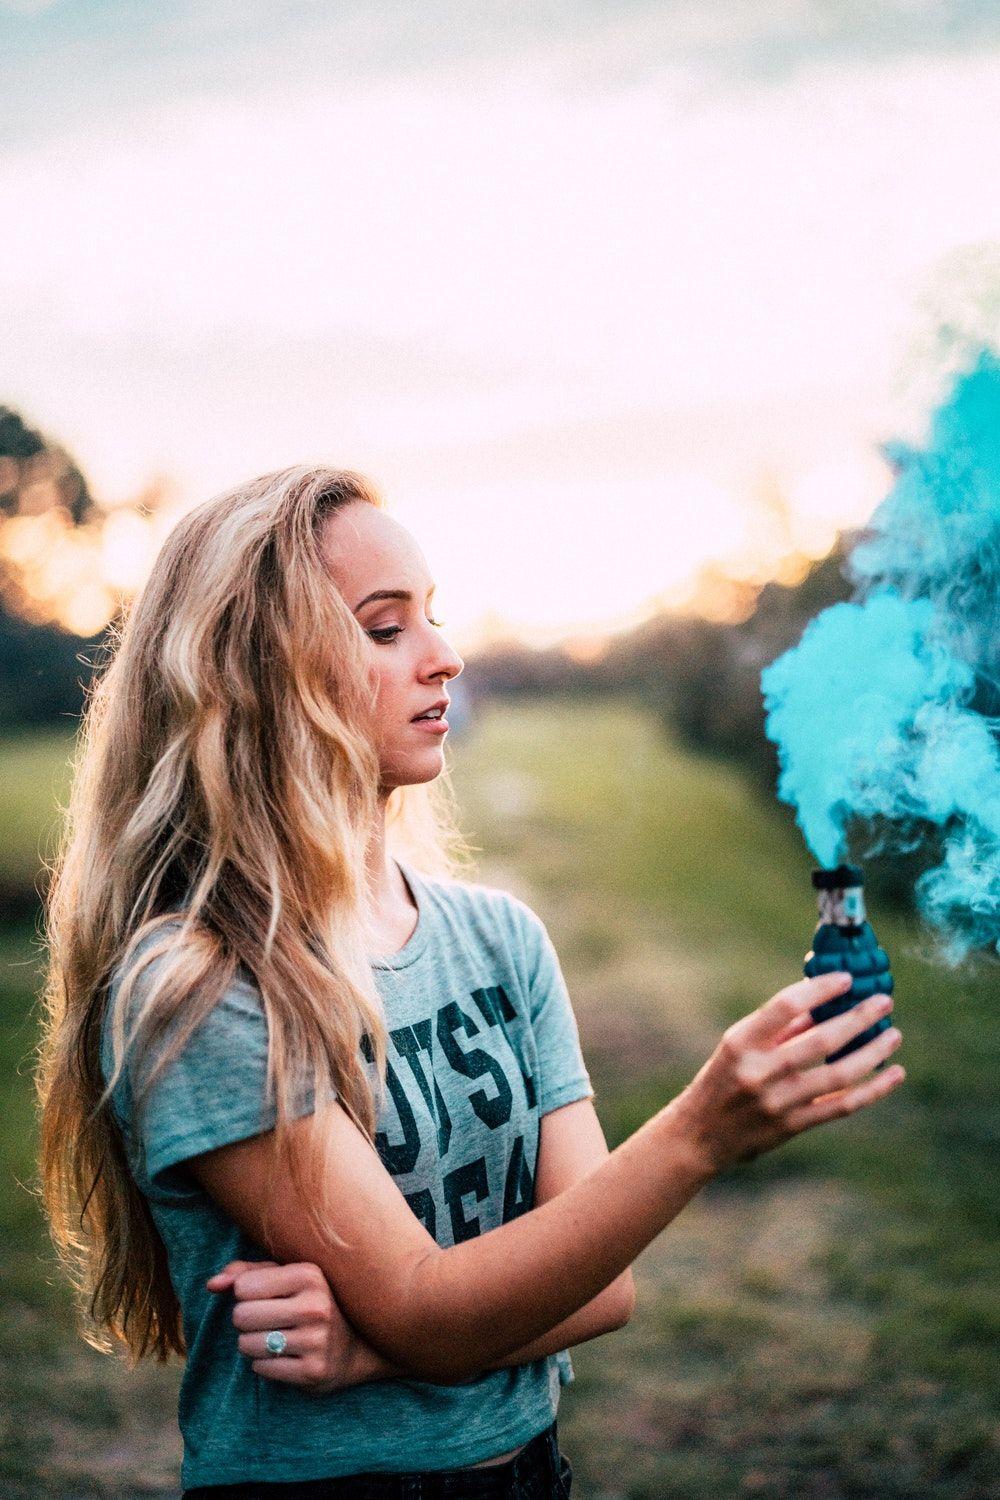 Smoke Bomb Picture. Download Free Image